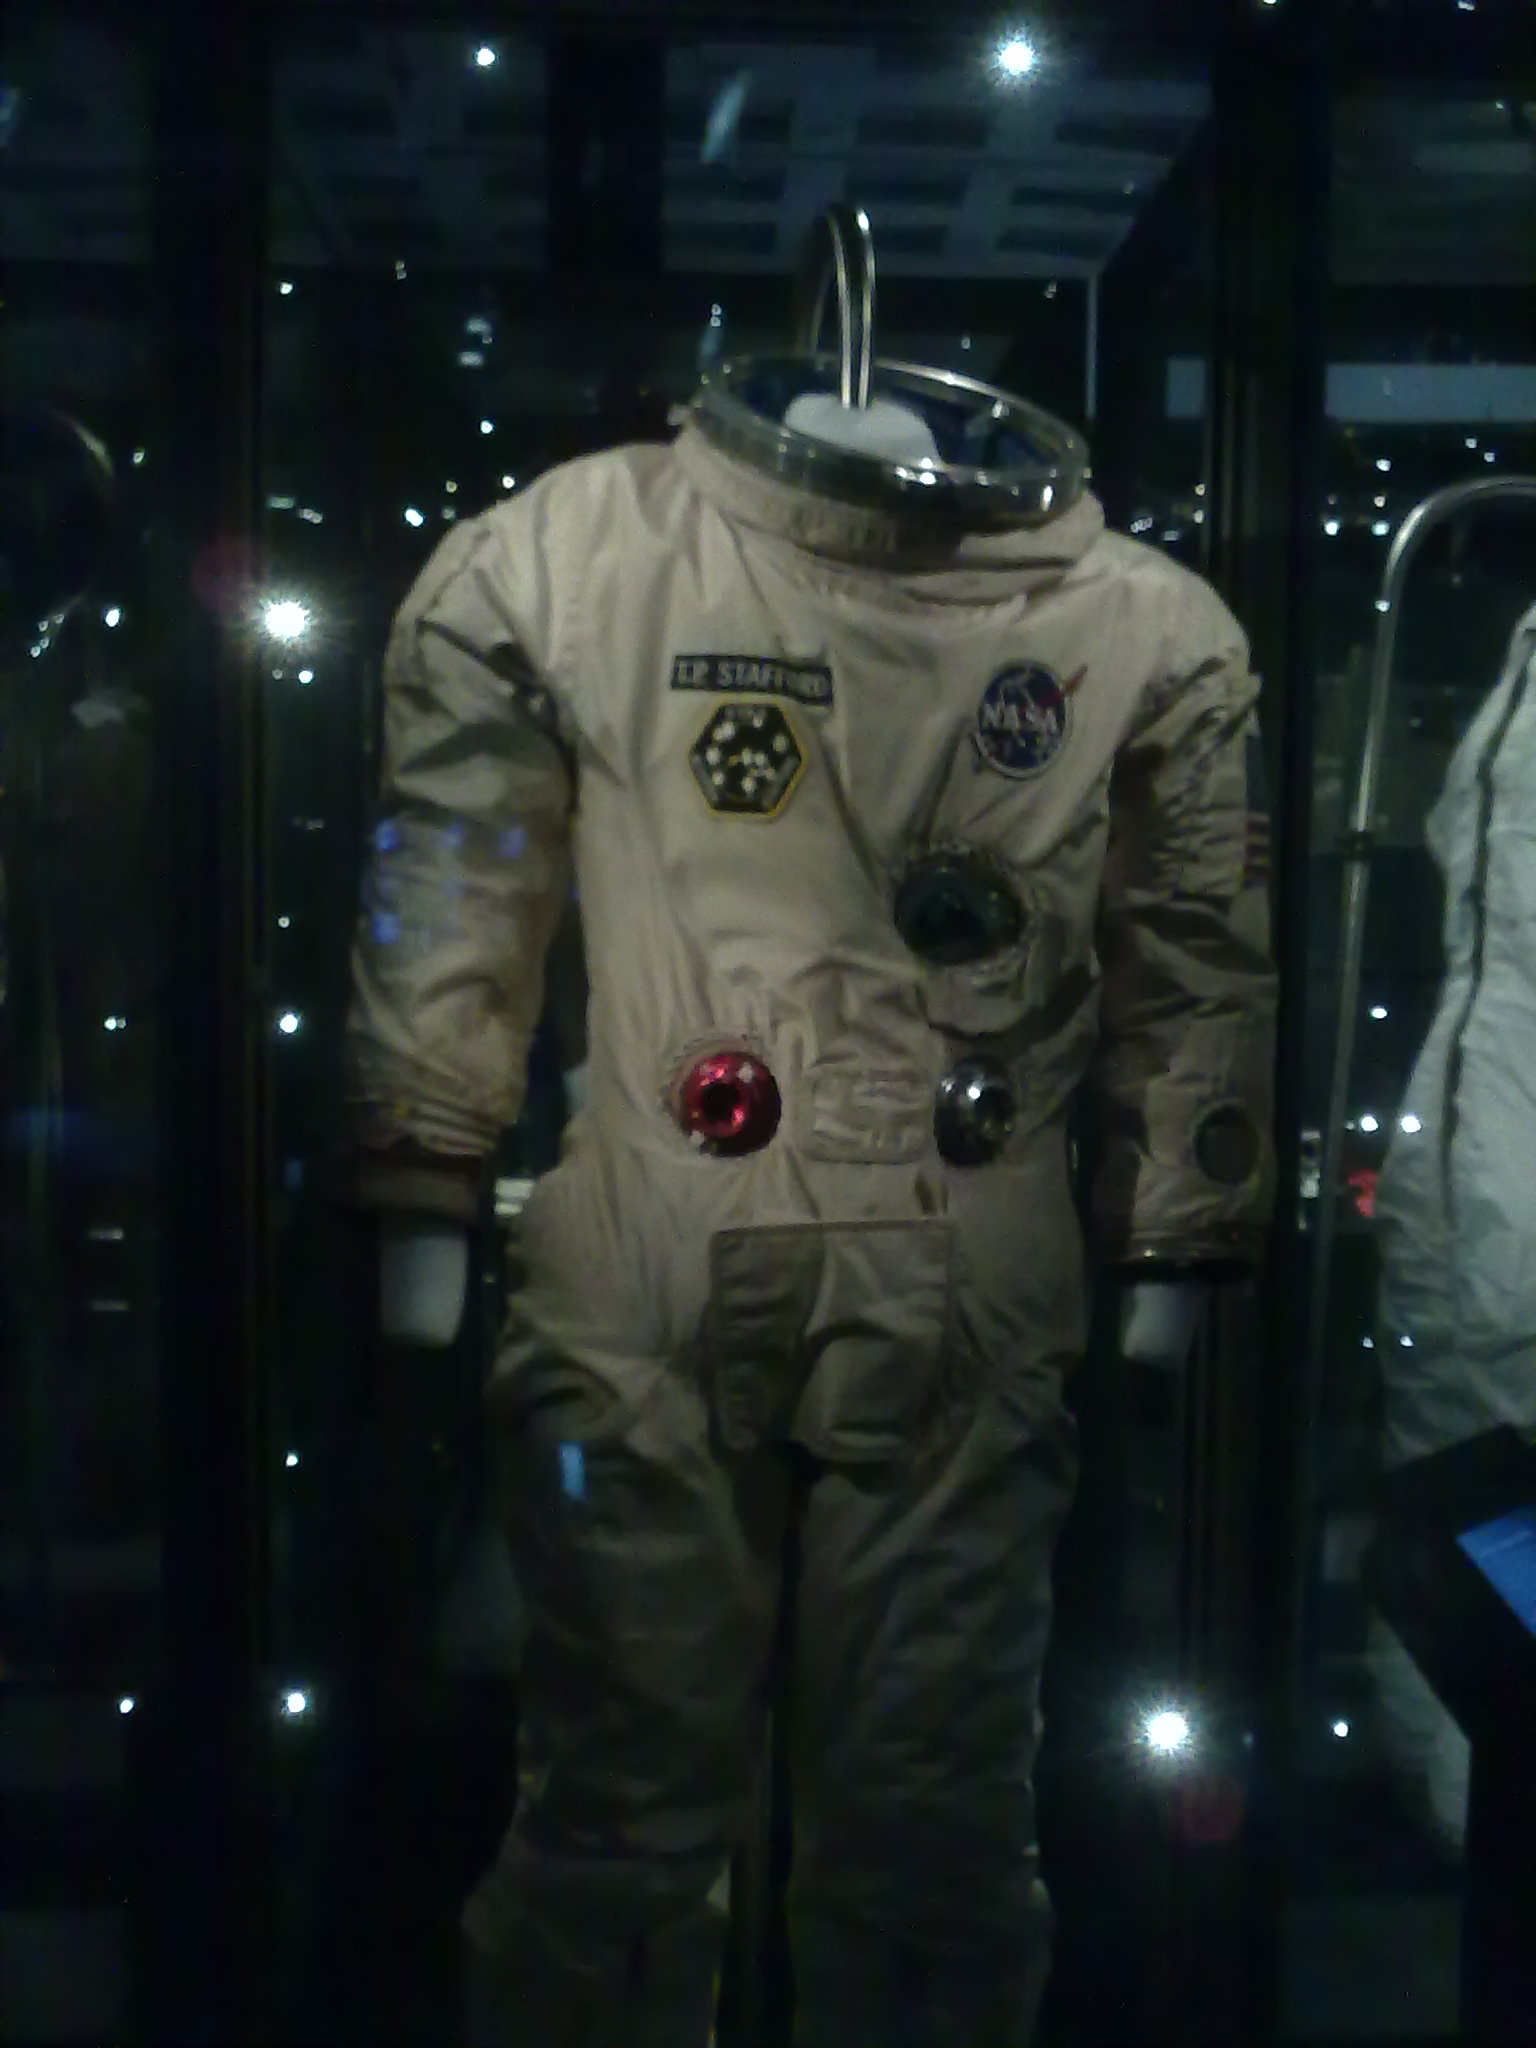 an astronaut suit sitting next to another astronaut suit